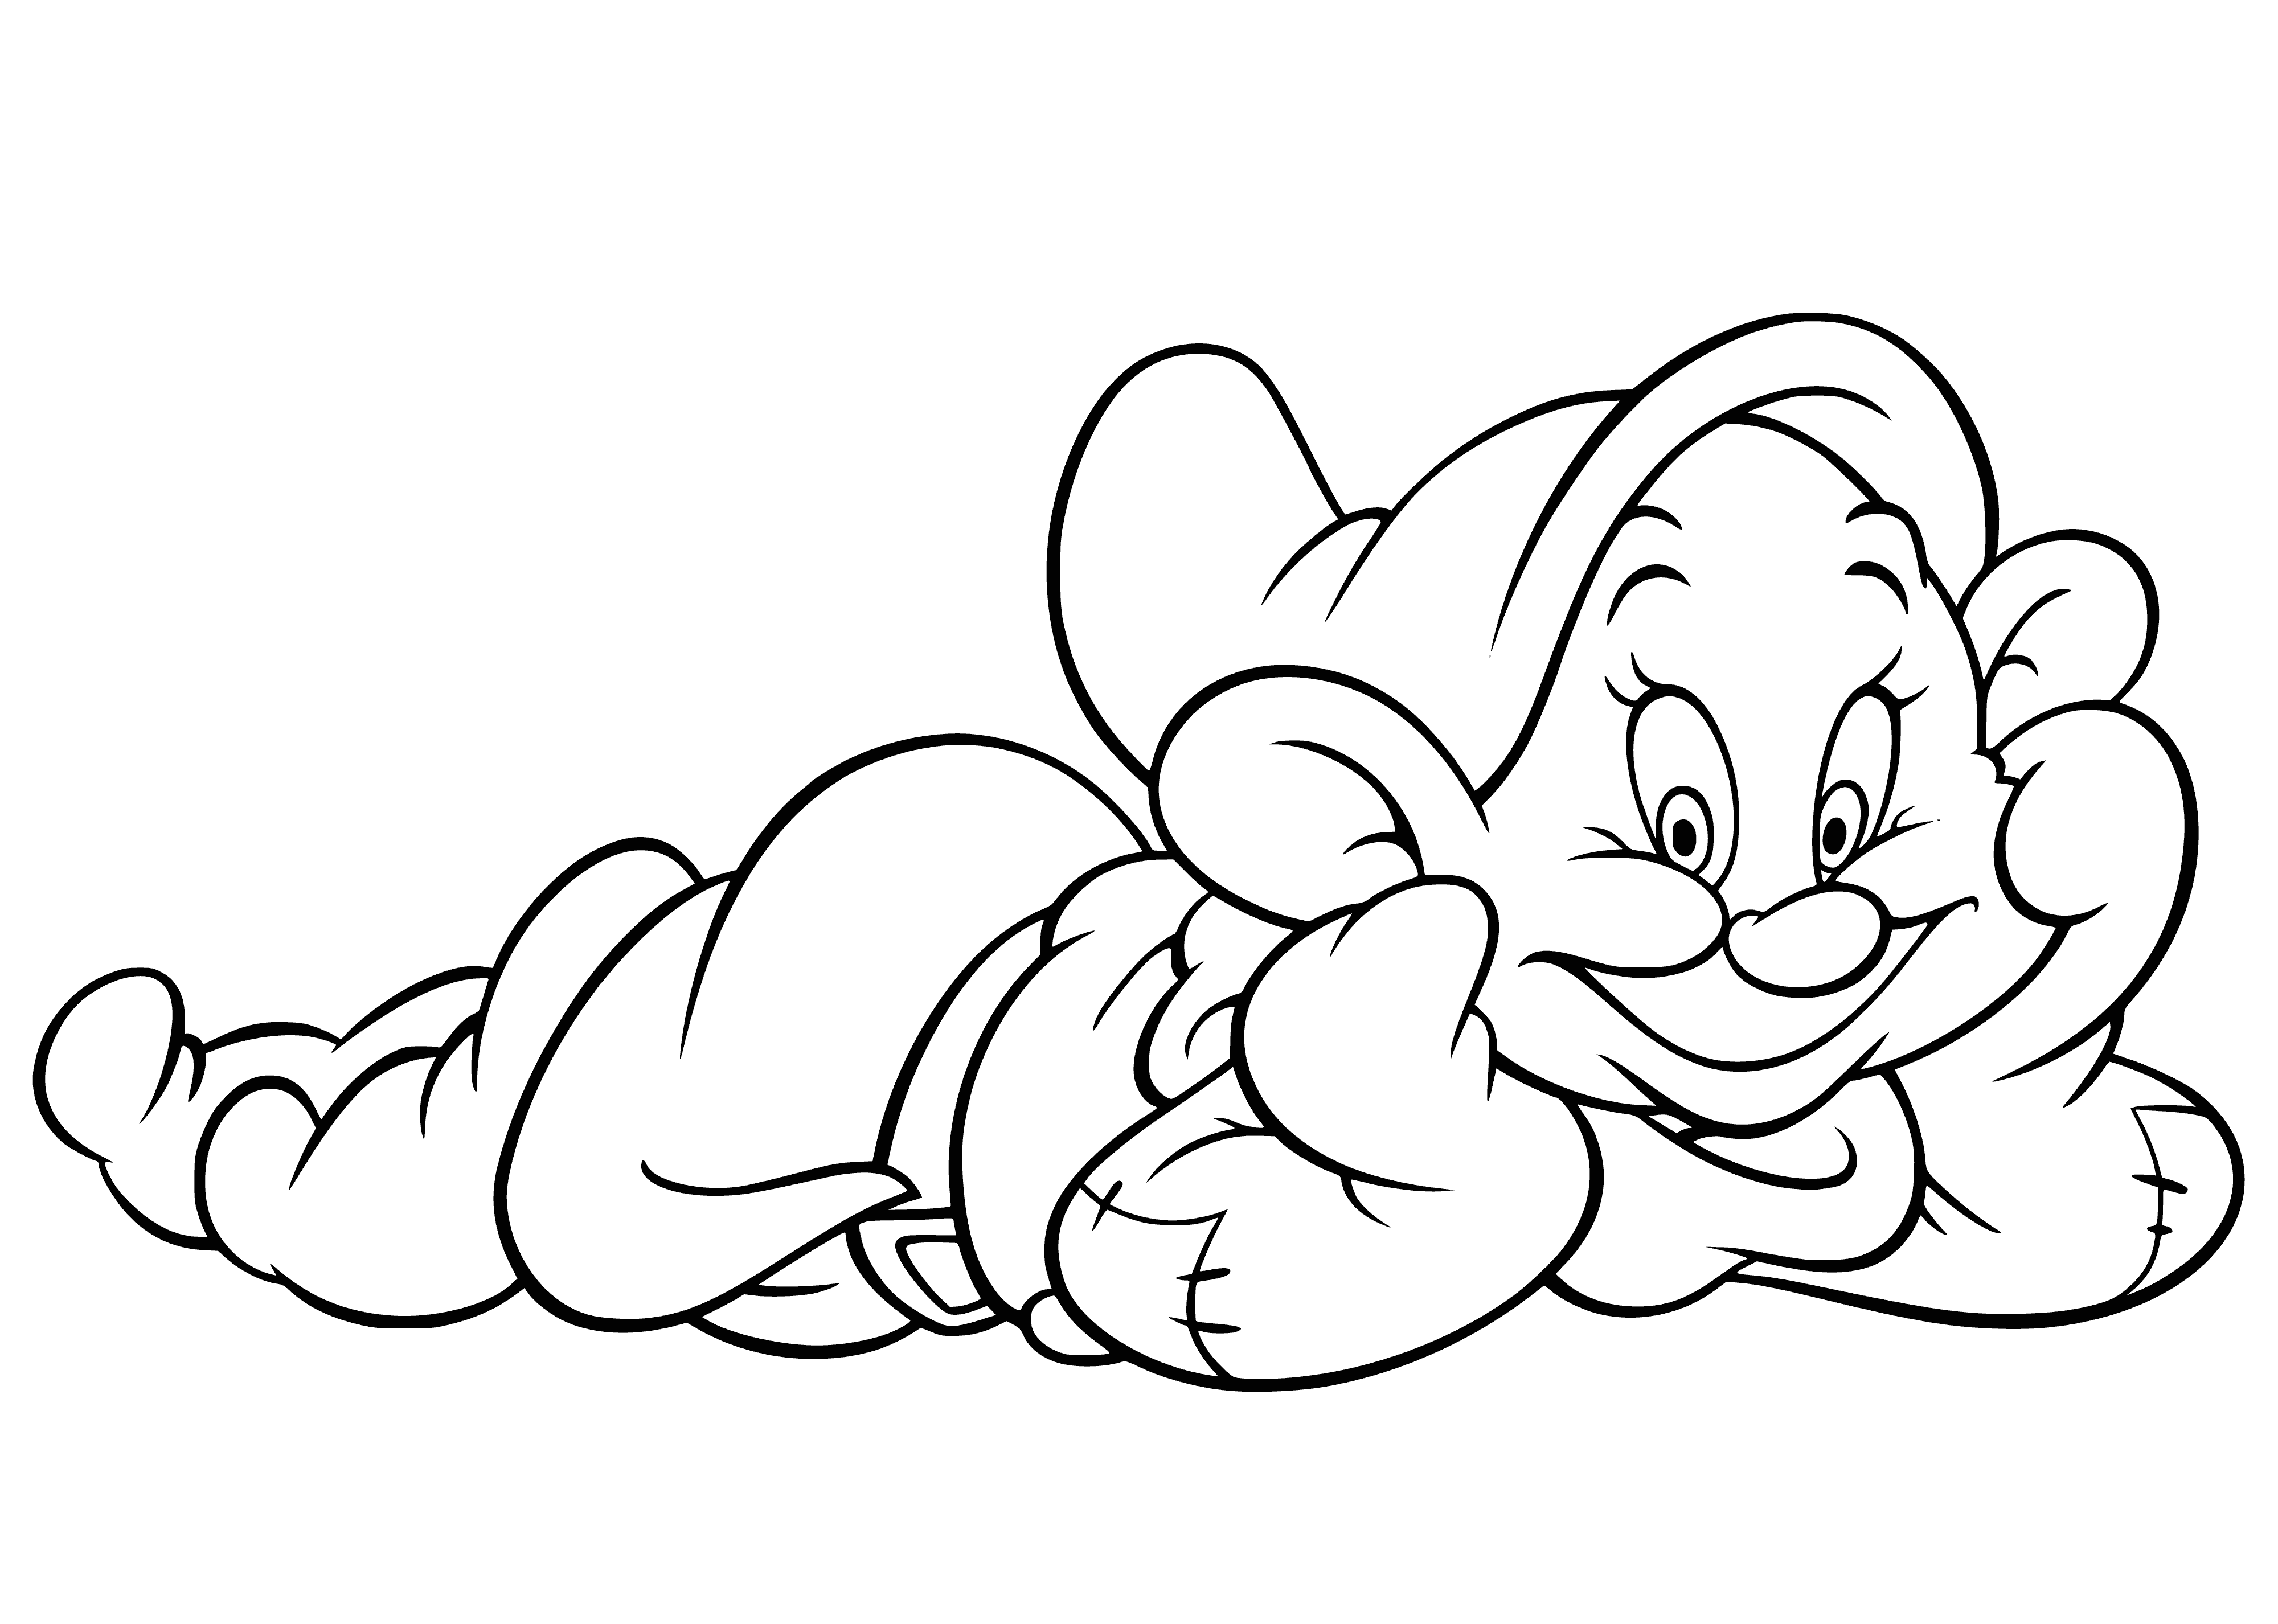 coloring page: Snow White and the Seven Dwarfs are standing in a line. Short and stocky with huge/small noses, they all wear brown pants and colored shirts (red, blue, yellow, green, purple, orange, and pink). The fourth dwarf is tallest, the fifth has the biggest nose, and the seventh is the shortest.